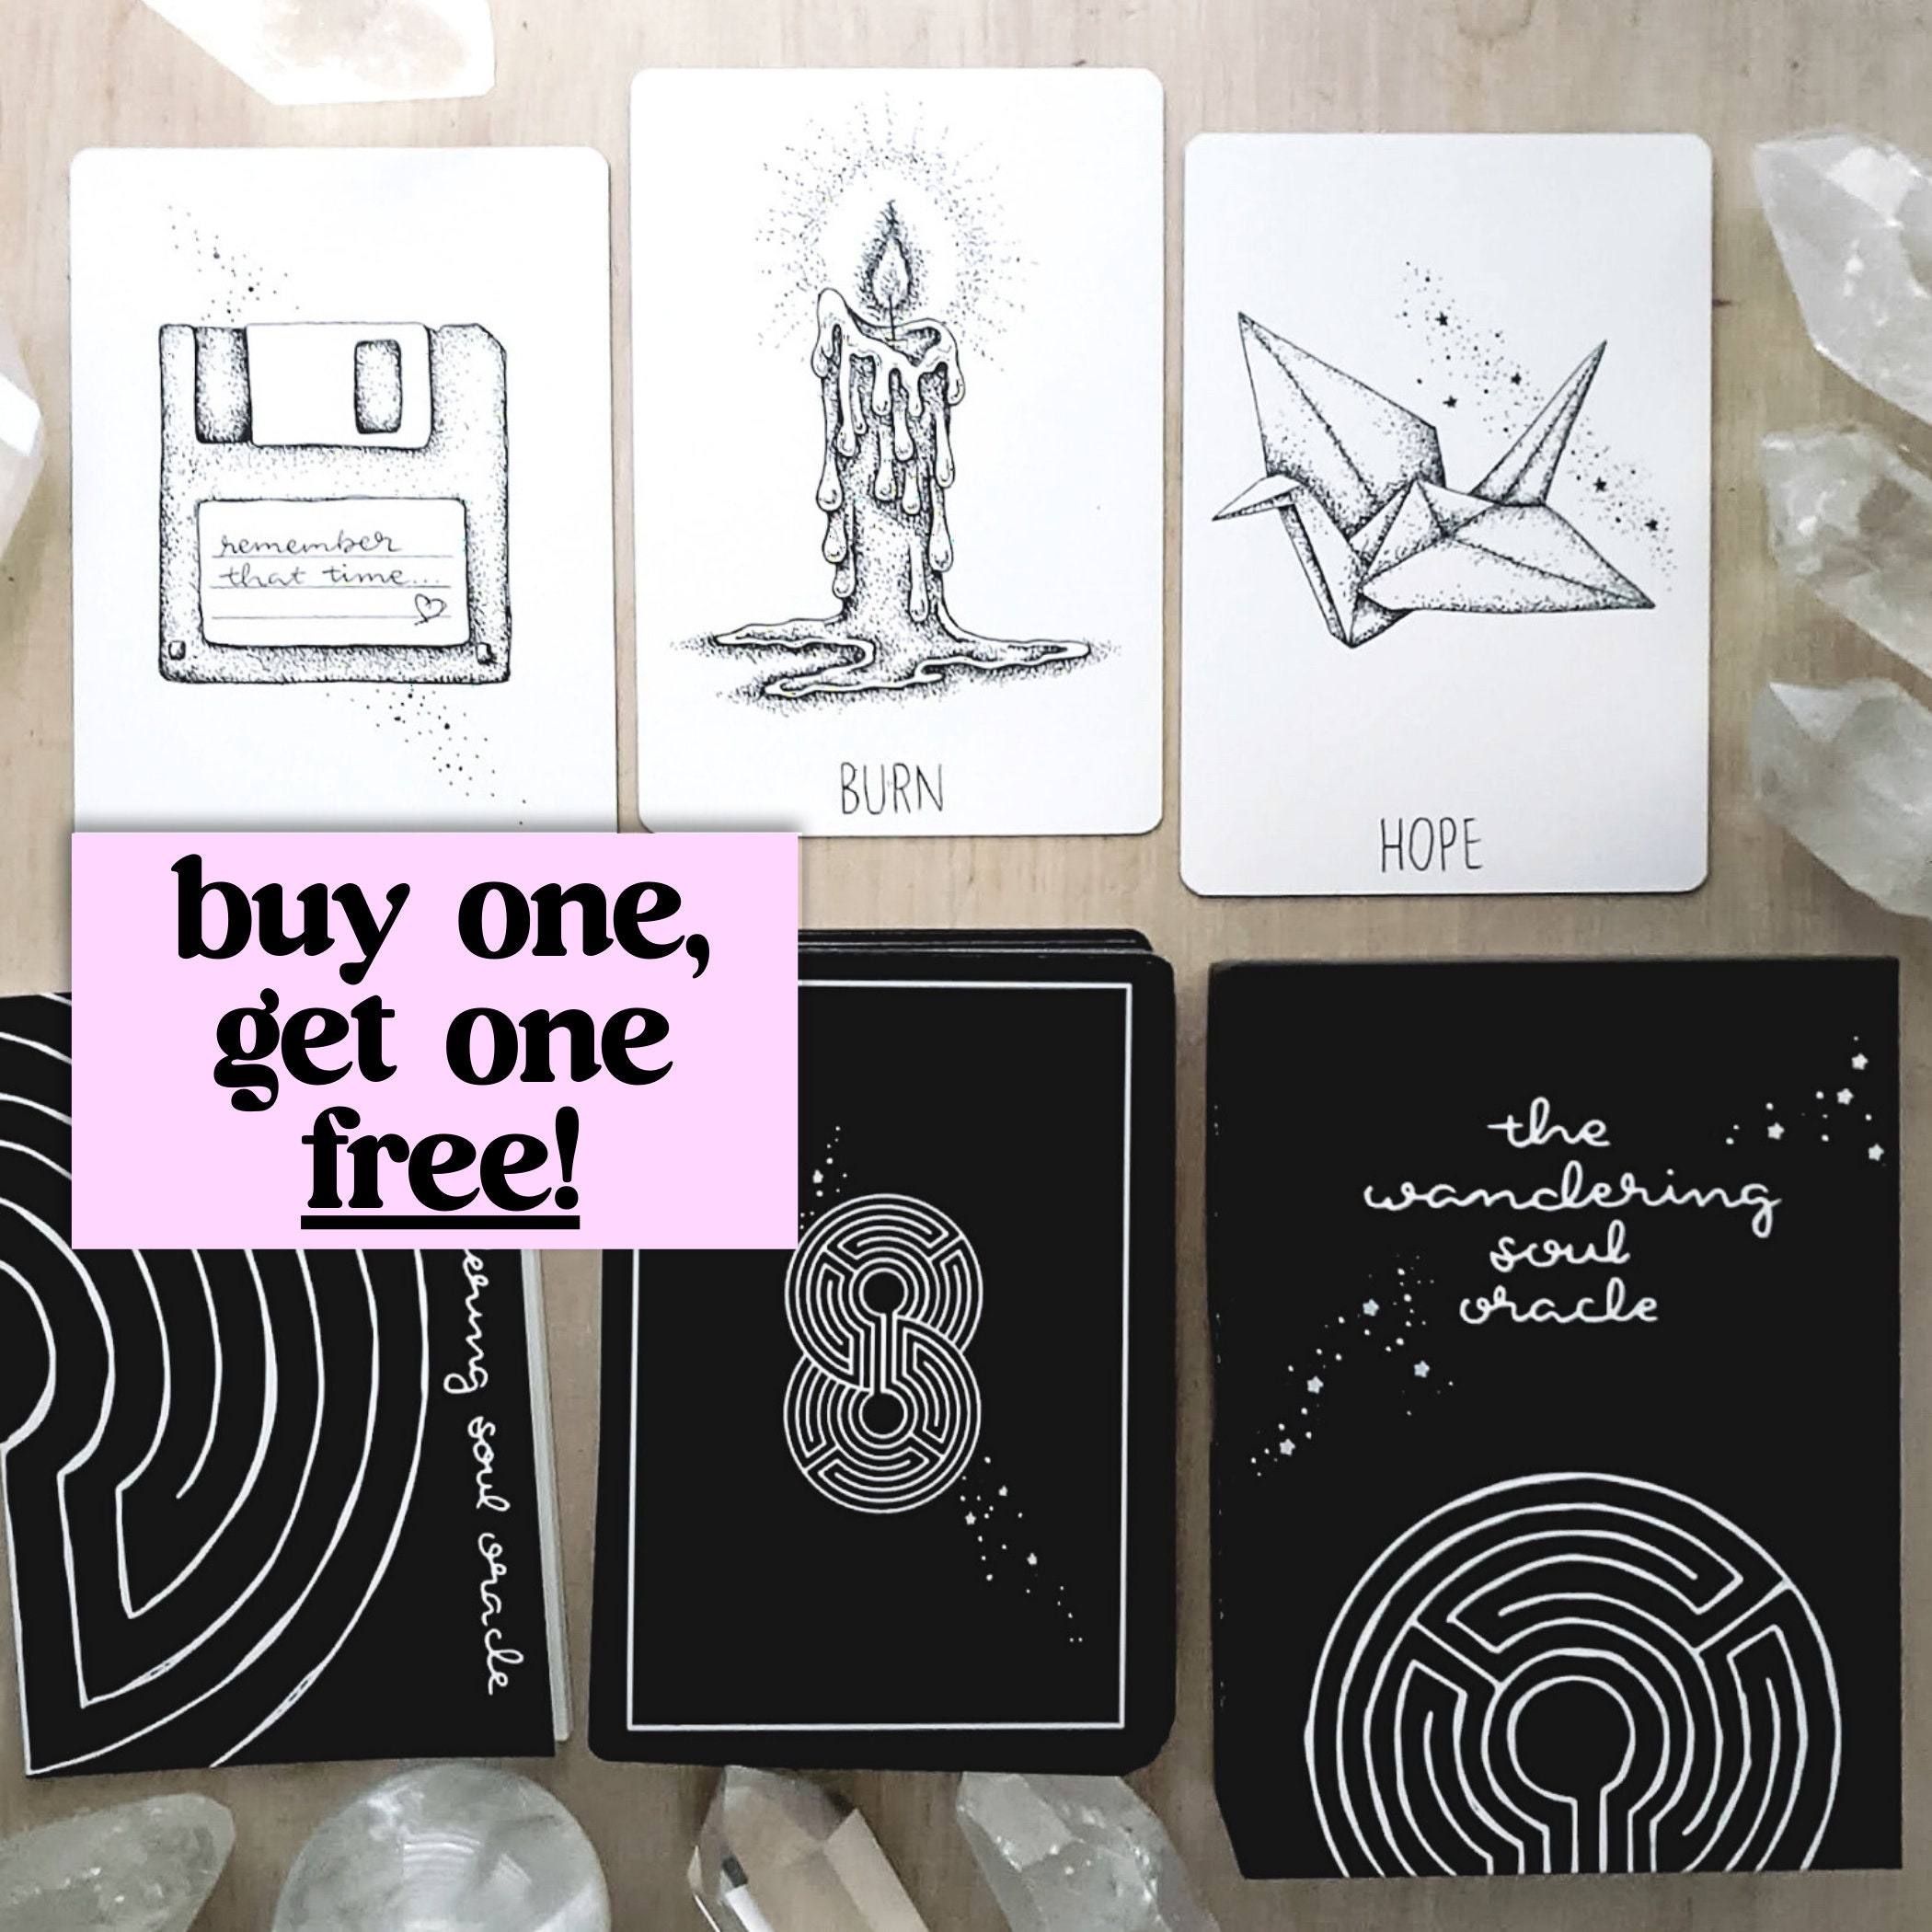 Free Tarot Deck the Wandering Soul Oracle With - Etsy